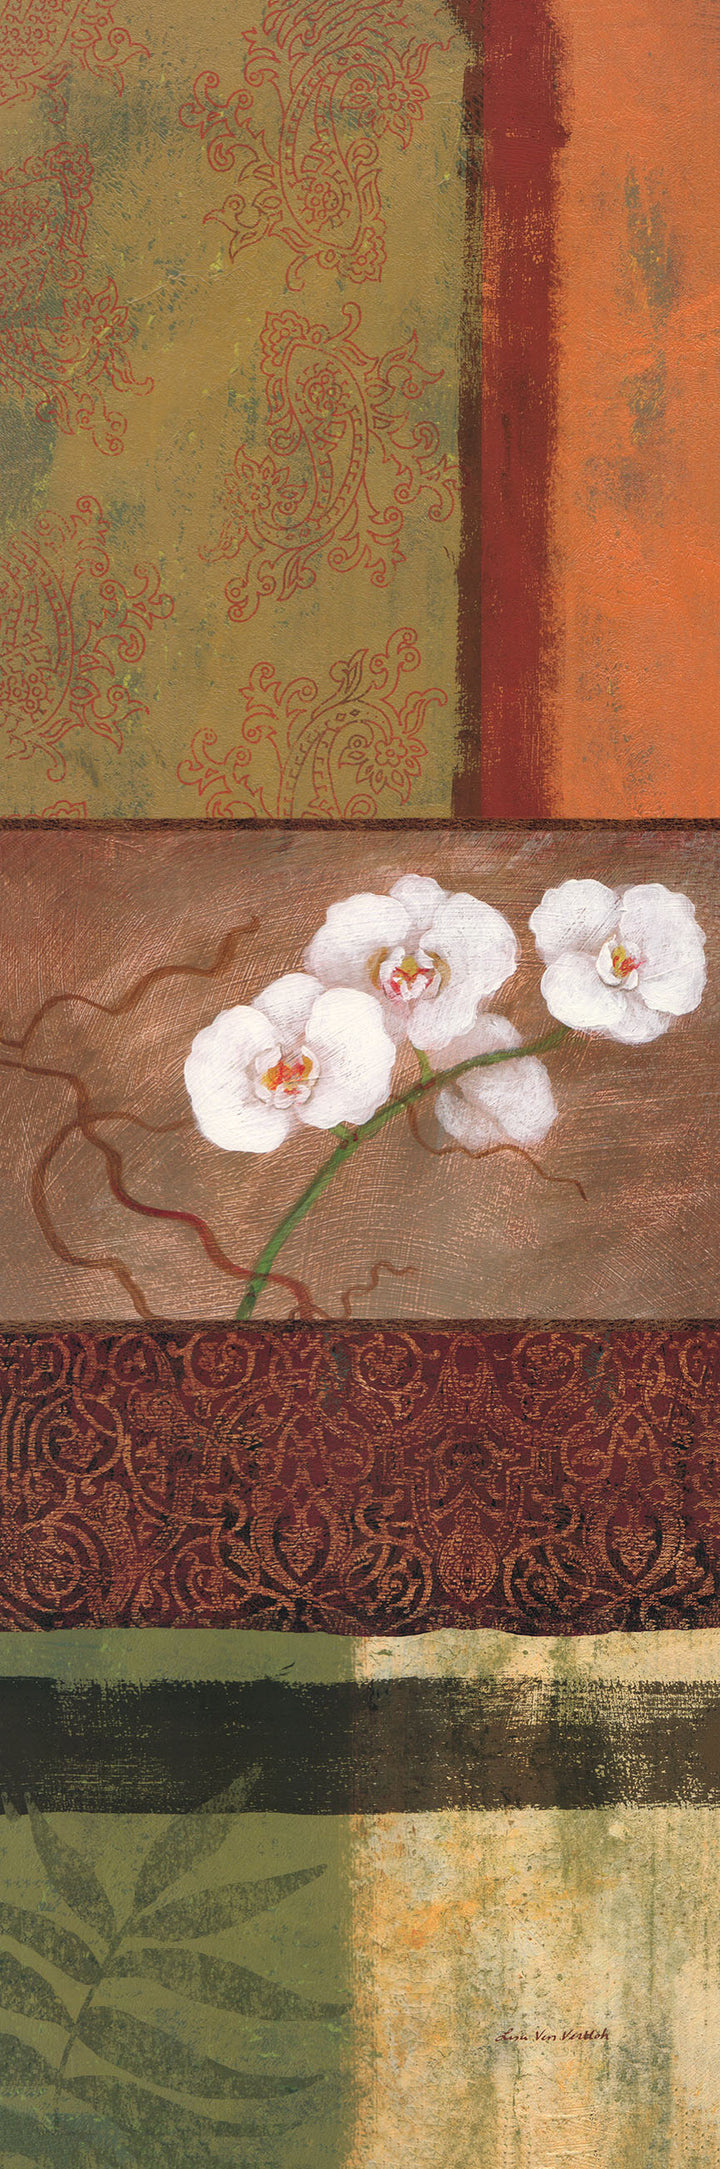 Orchid Tapestry I by Lisa Ven Vertloh - 12 X 36 Inches (Art Print)